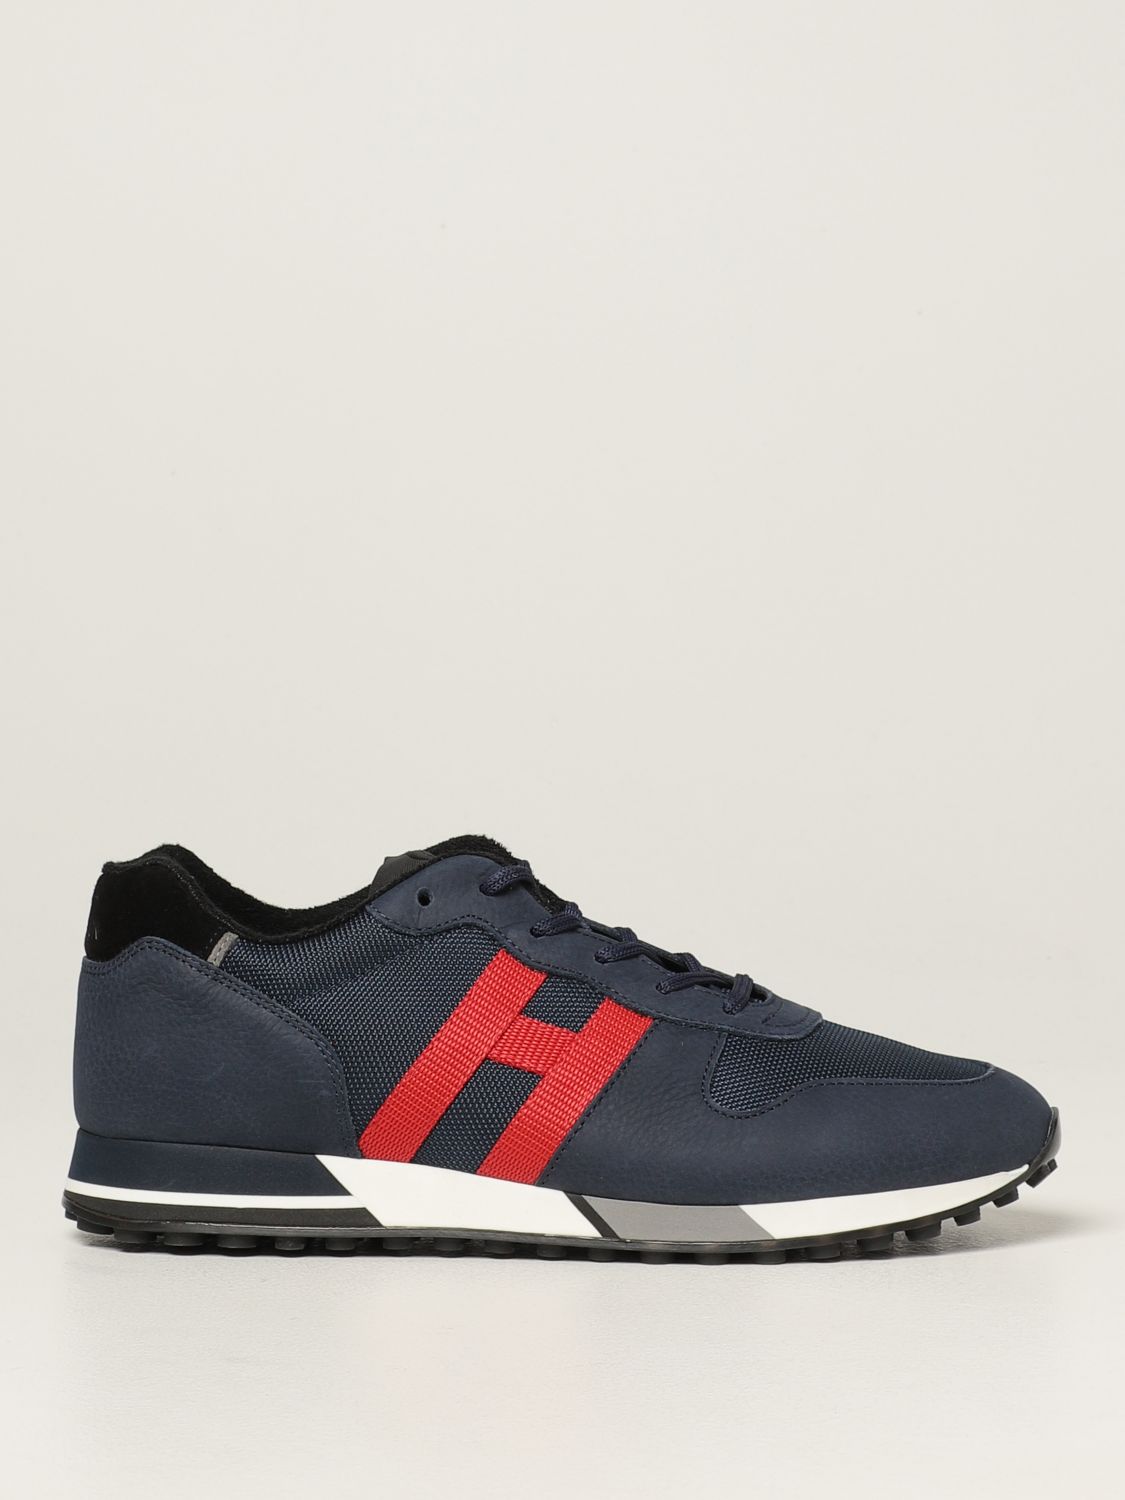 Hogan H383 Running Trainers In Mesh And Leather In Smoke Grey | ModeSens